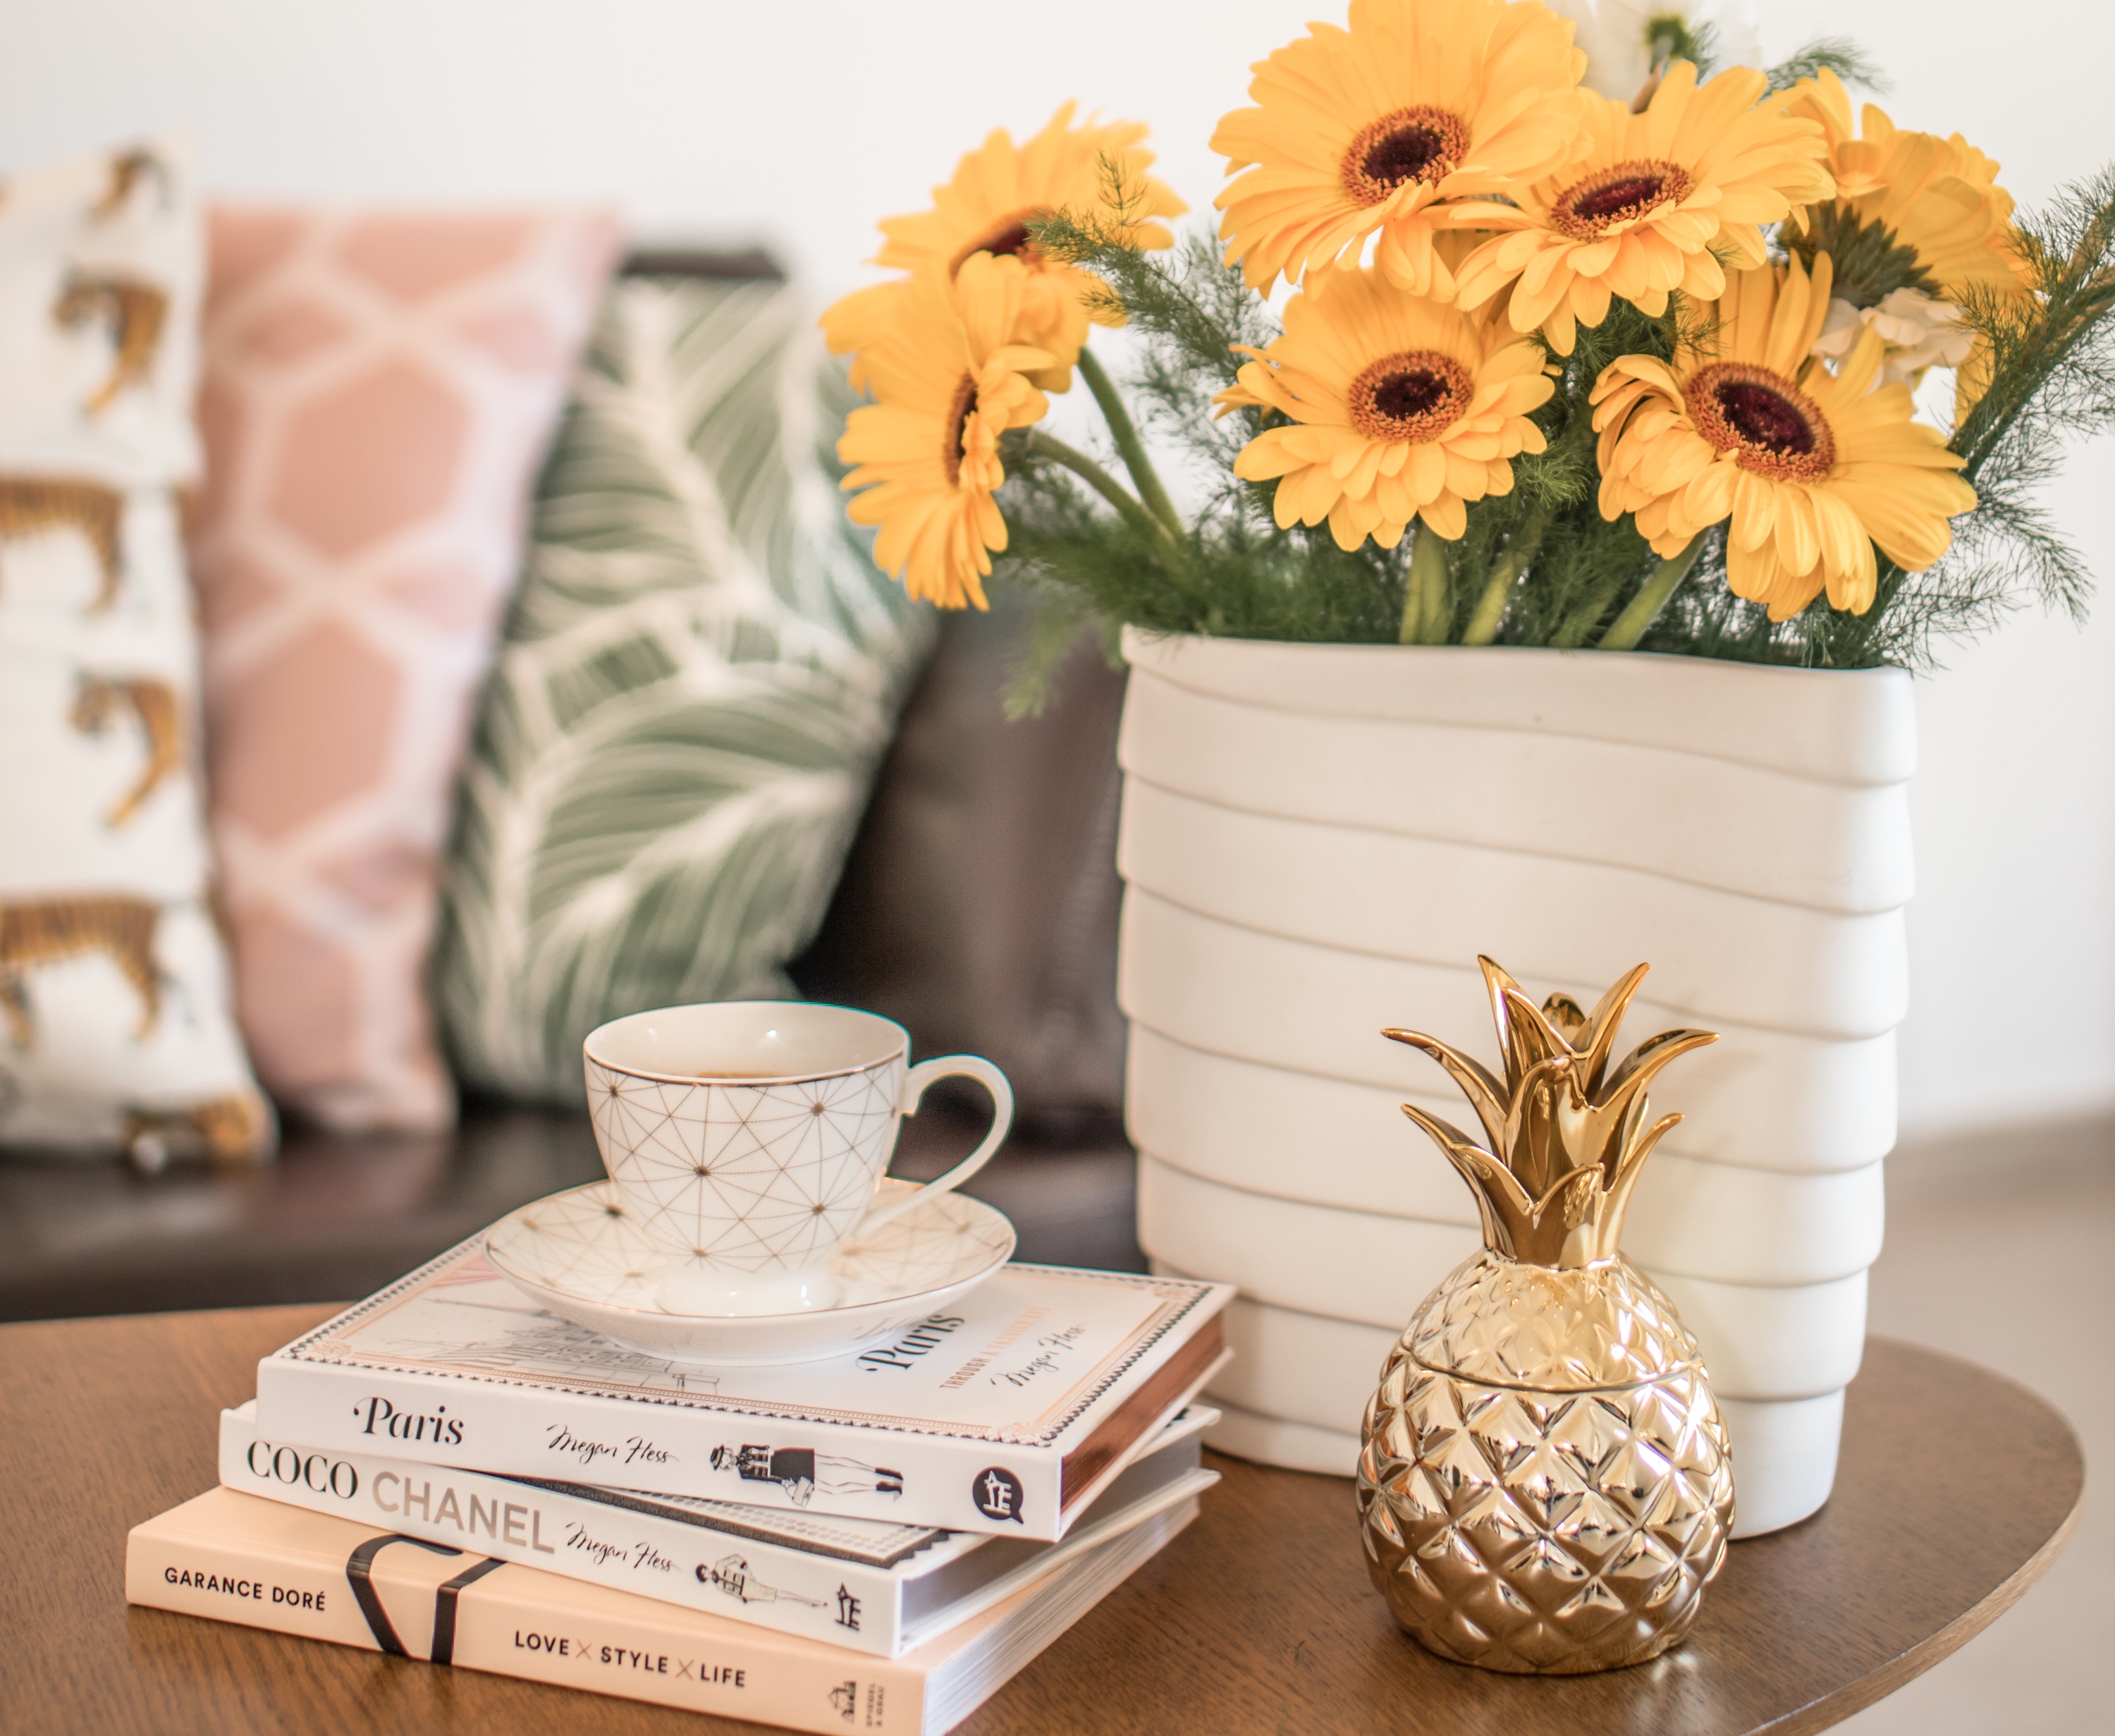 Flowers and books on table in living room